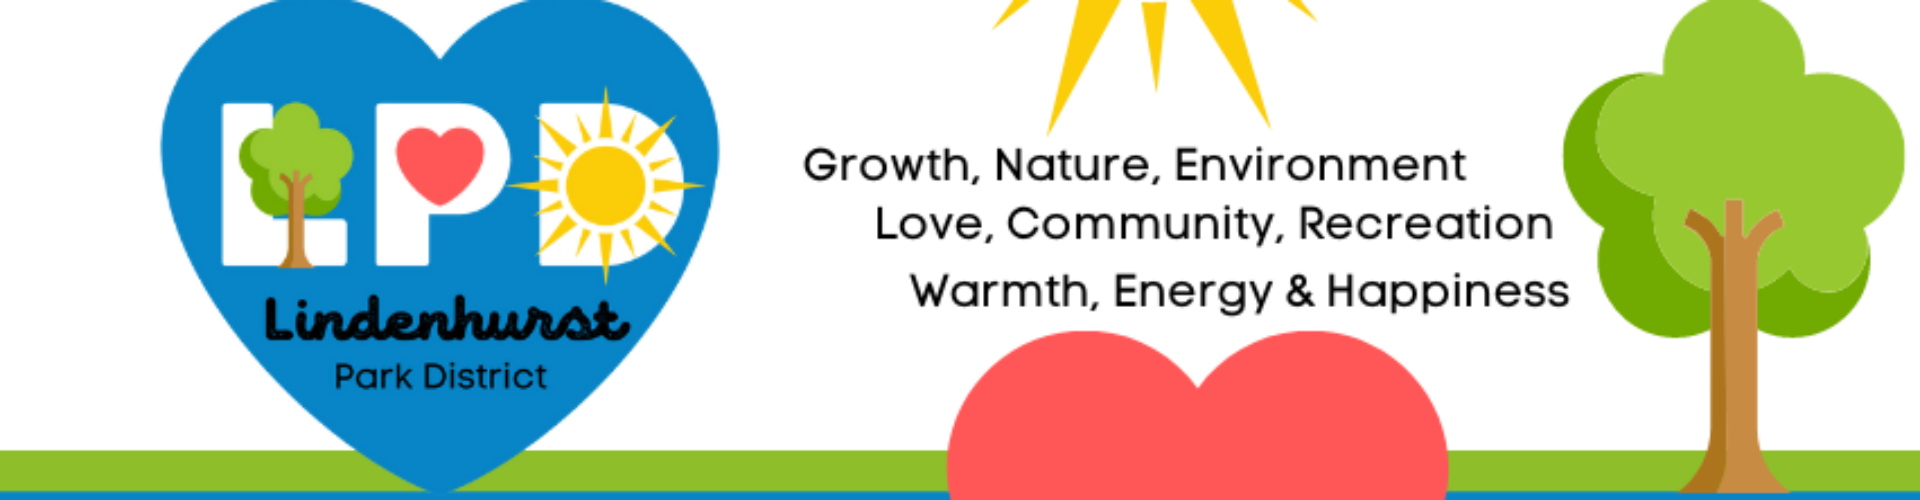 Banner for Lindenhurst Park District that reads: Growth, Nature, Environment, Love, Community, Recreation, Warmth, Energy & Happiness